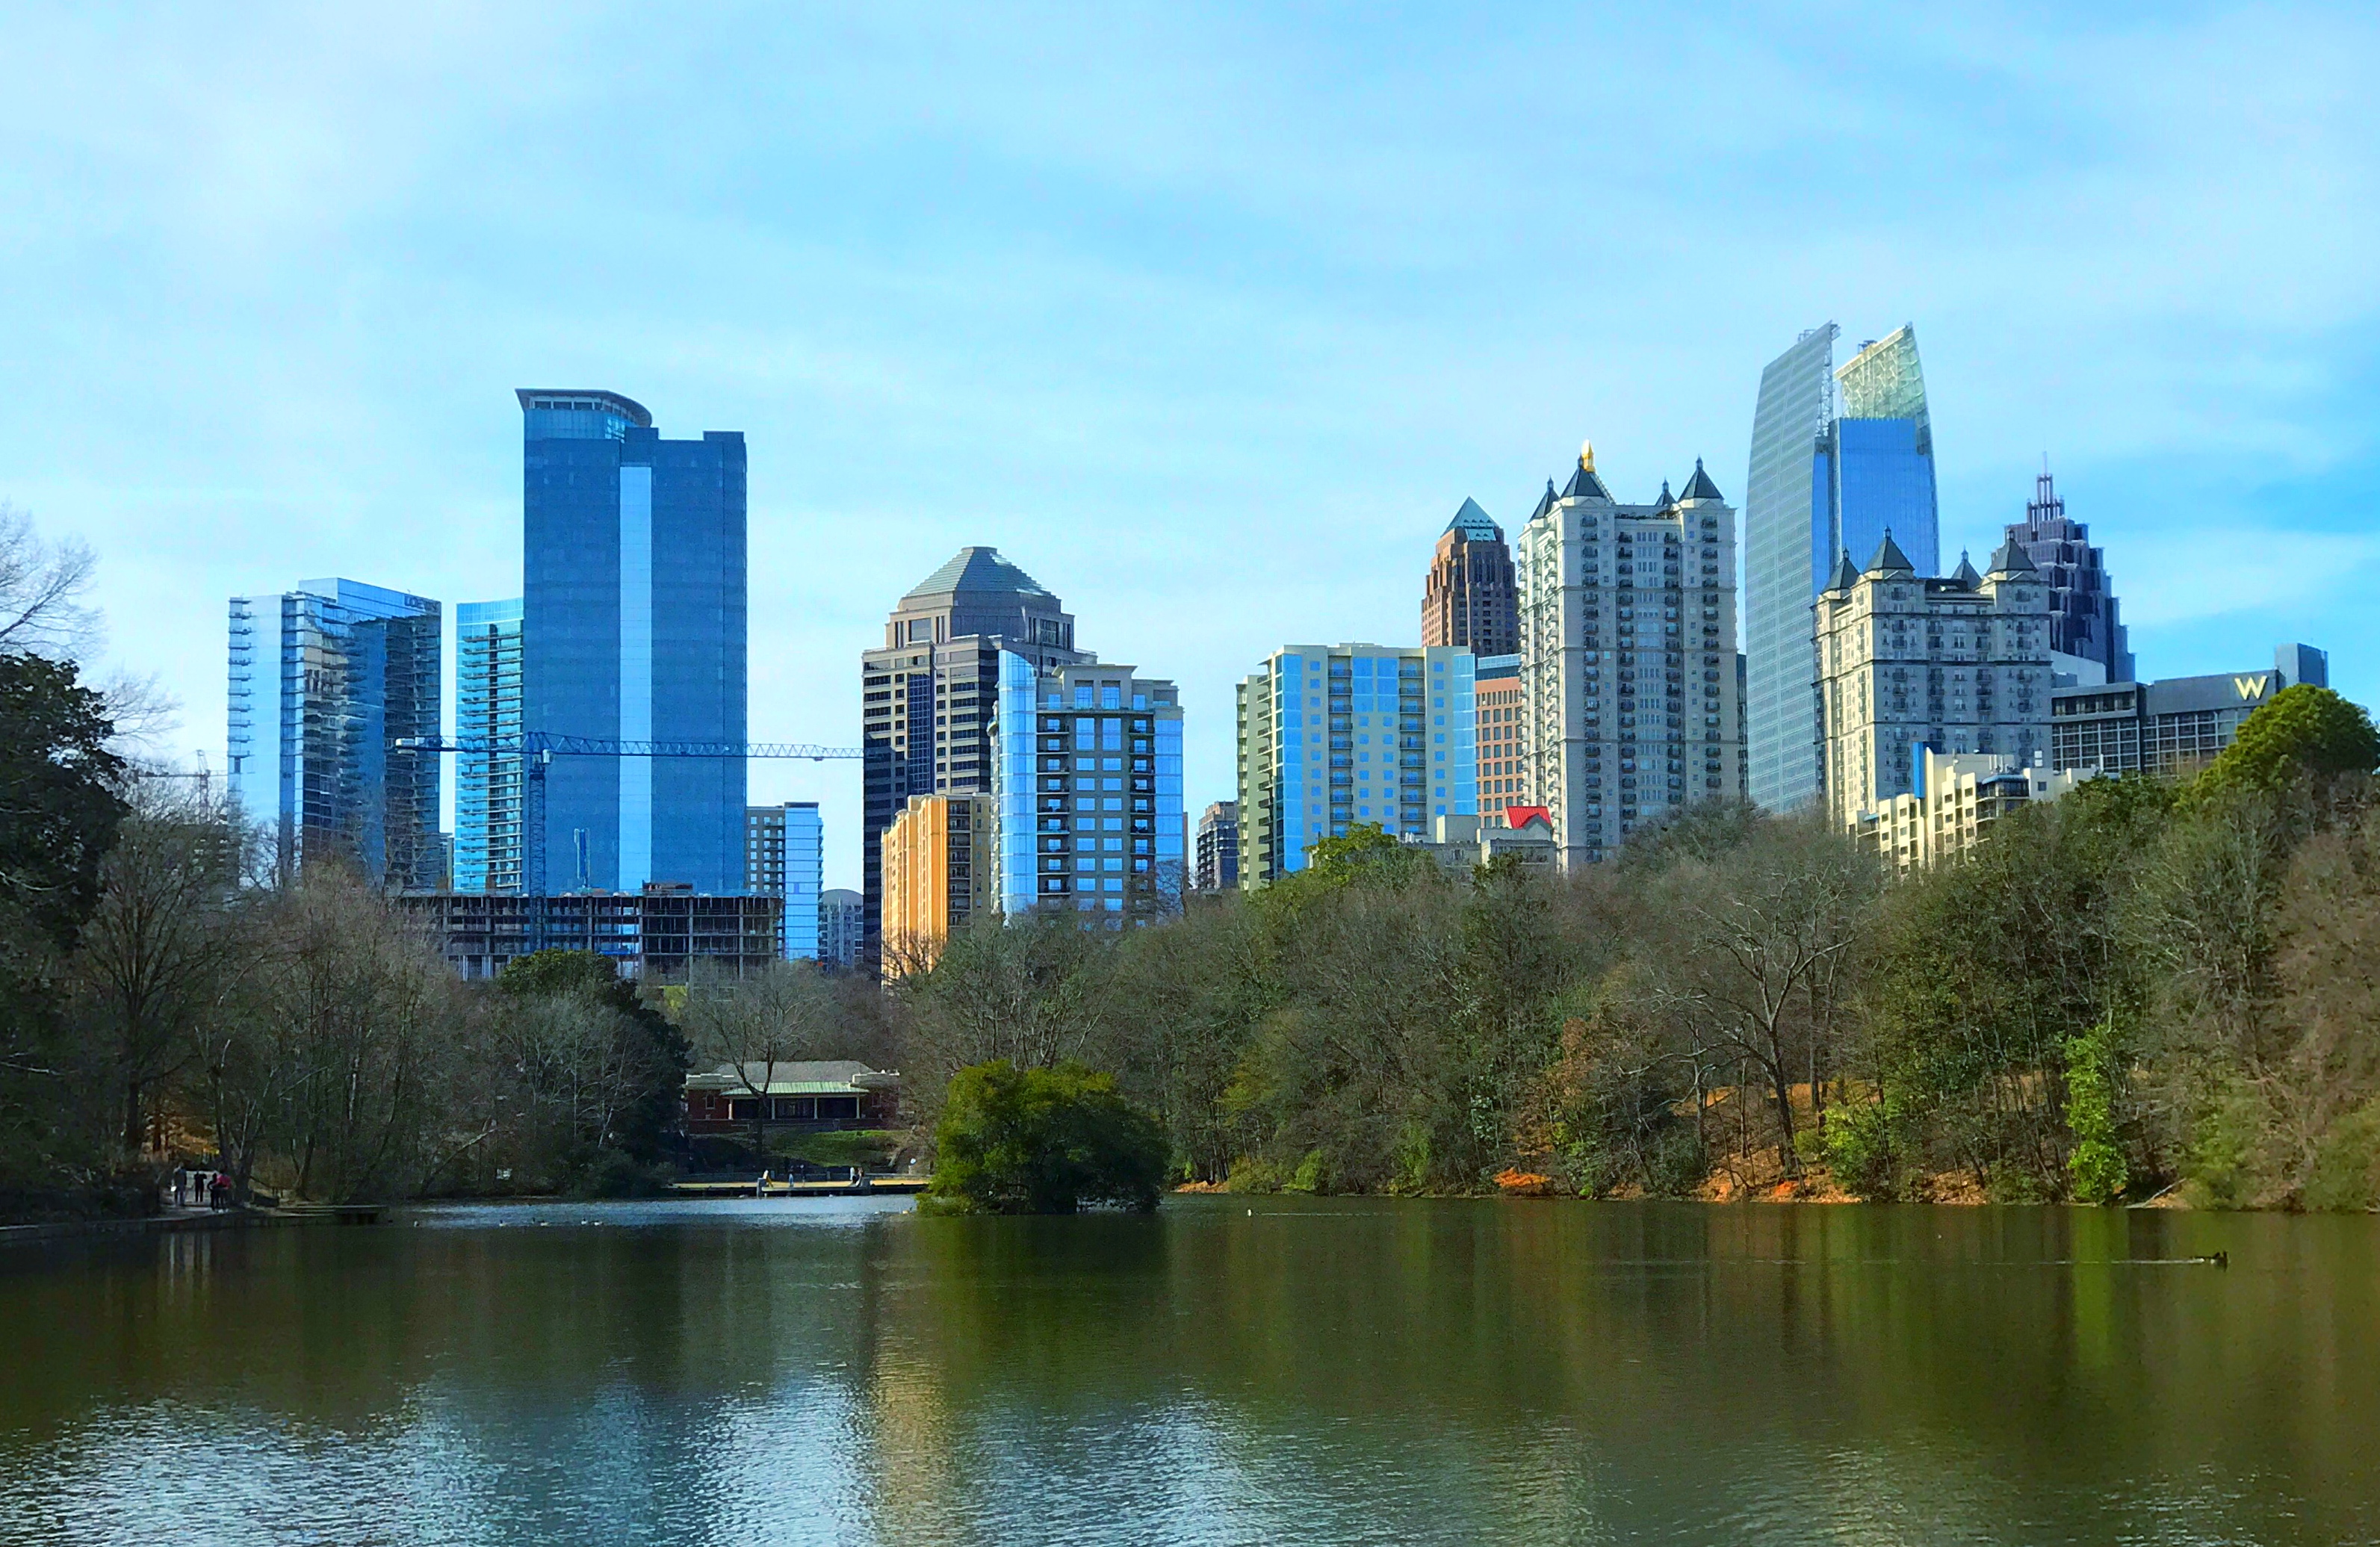 Piedmont Park is a Great Place to Slow Down